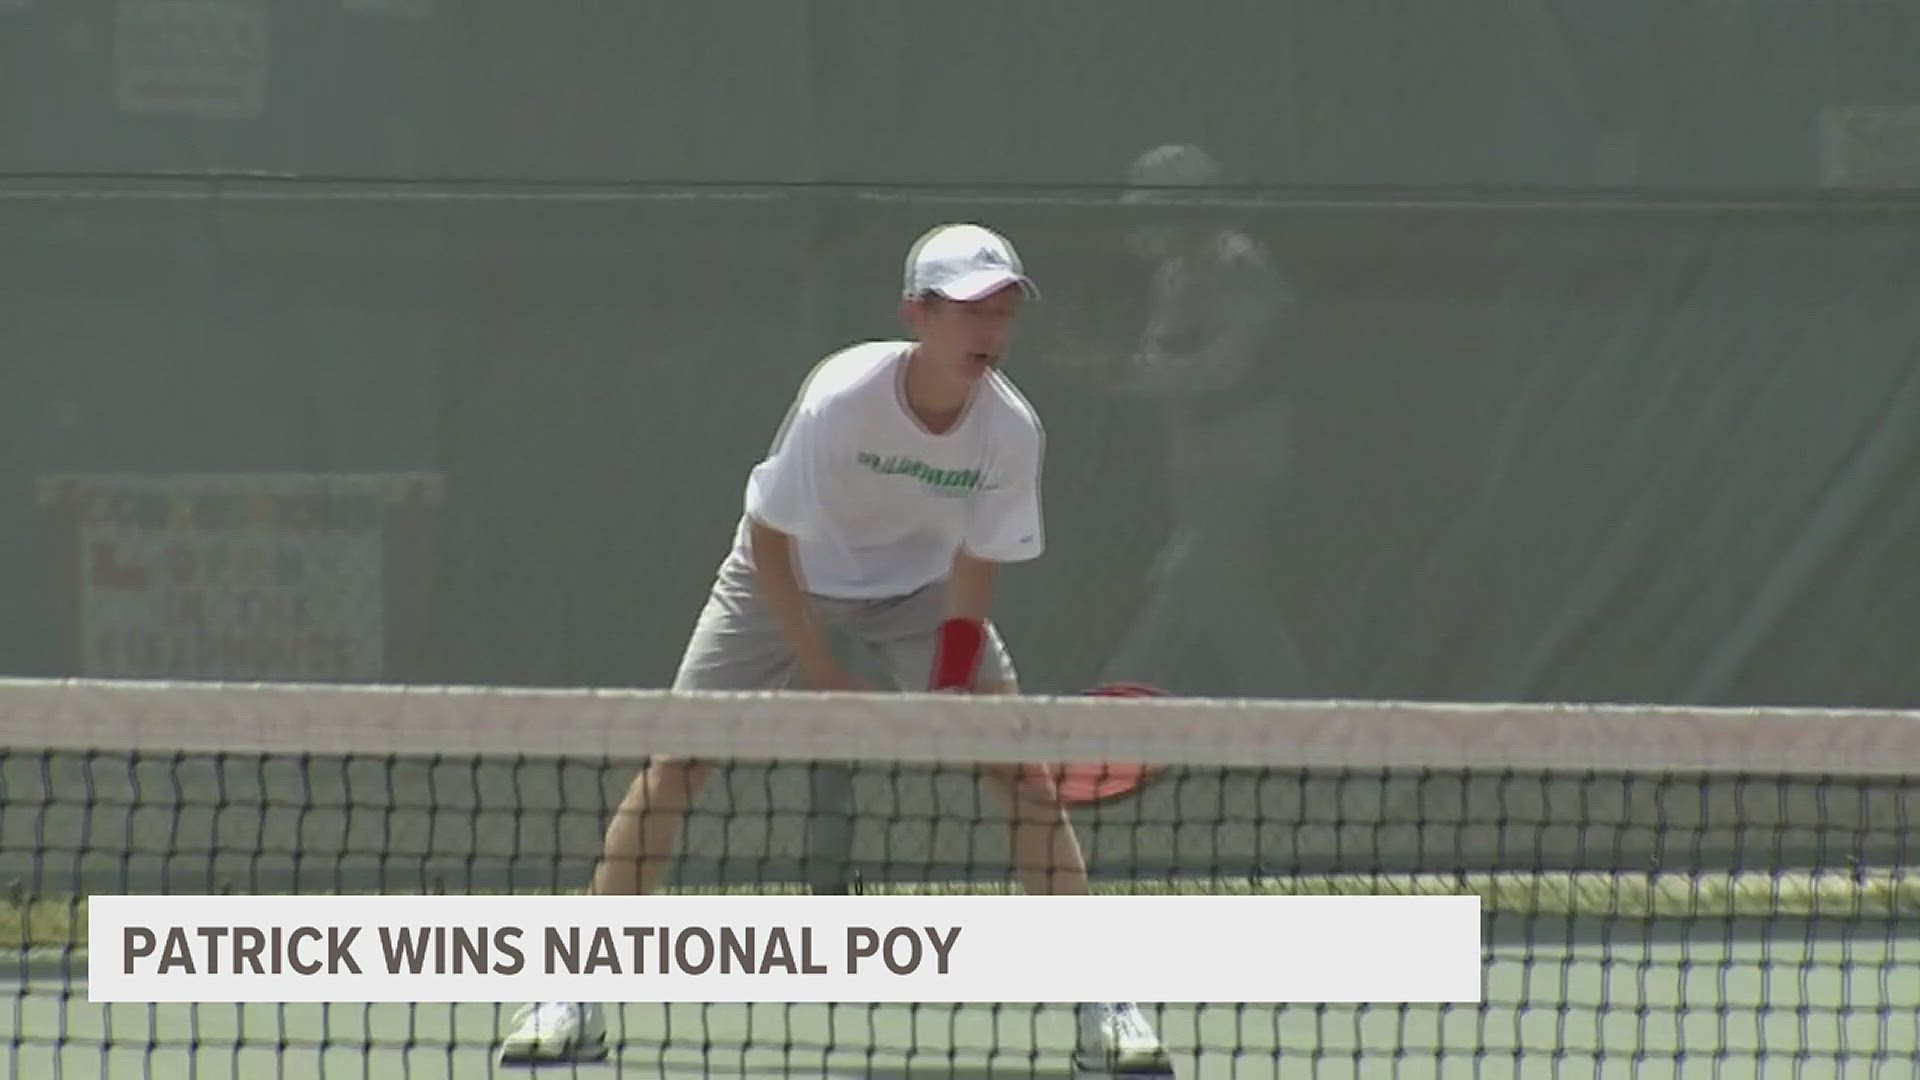 Alleman Junior to be, Nicholas Patrick win the USA Today National Boys Tennis Player of the Year.